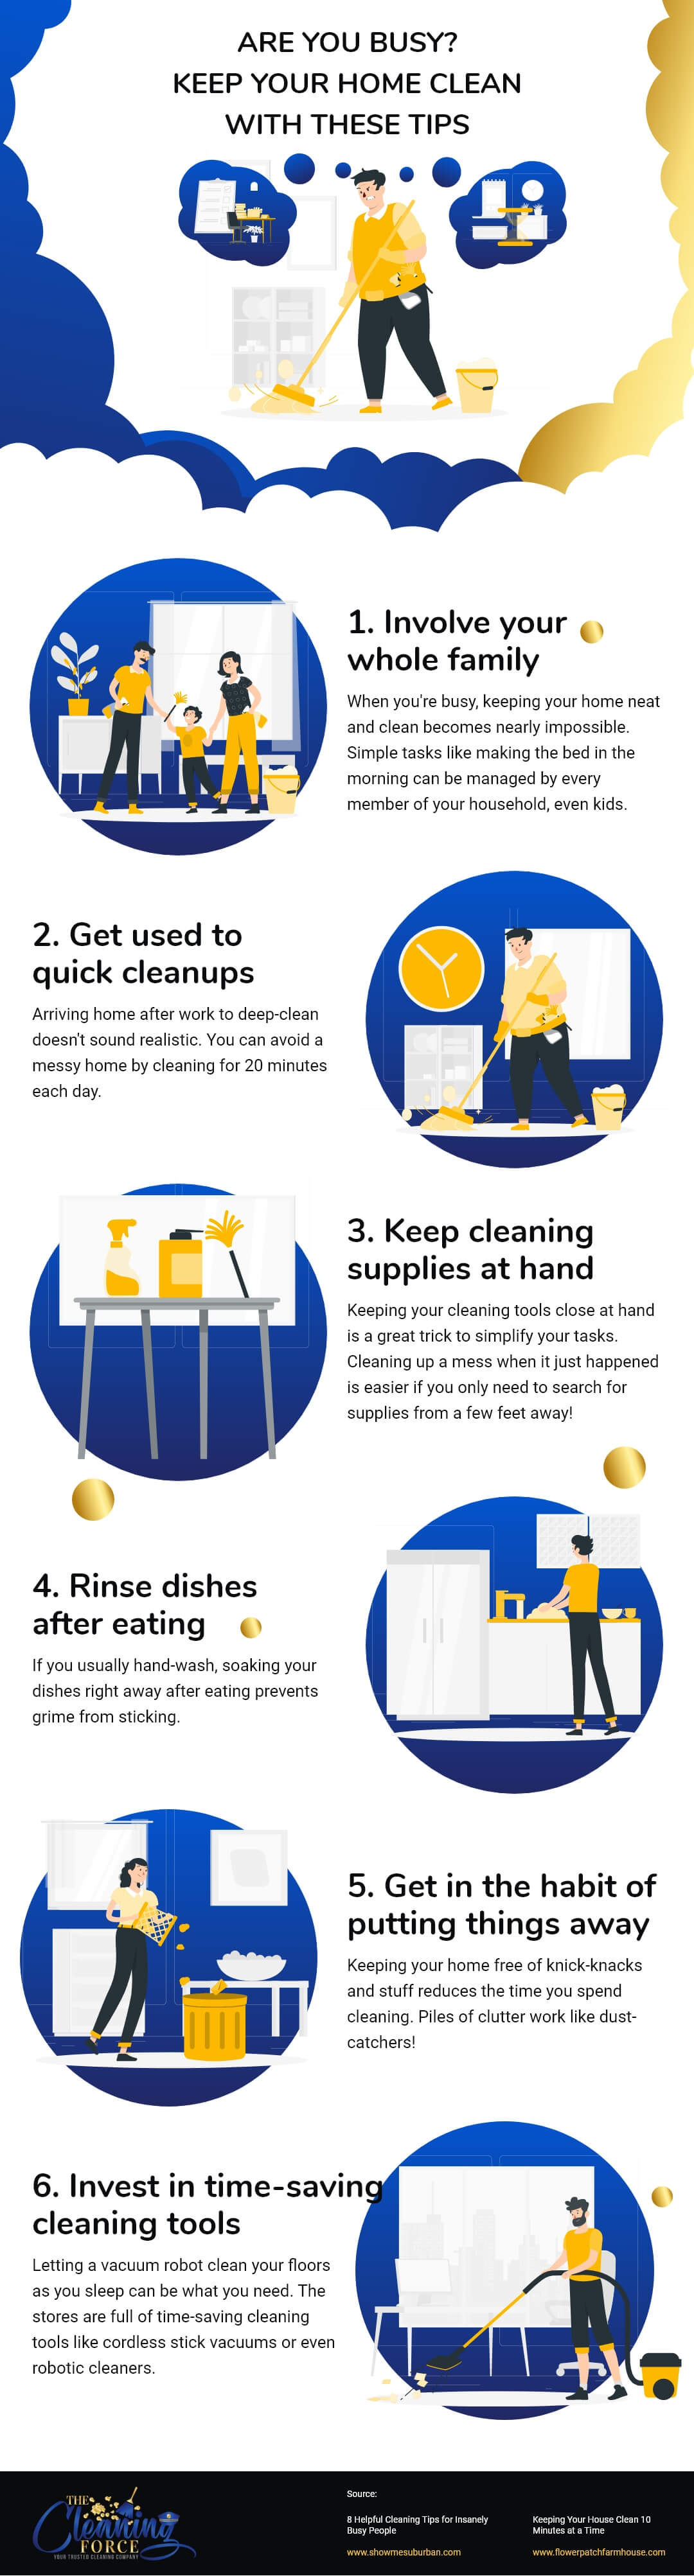 5 Cleaning Tricks for People Who Don't Like Washing Dishes